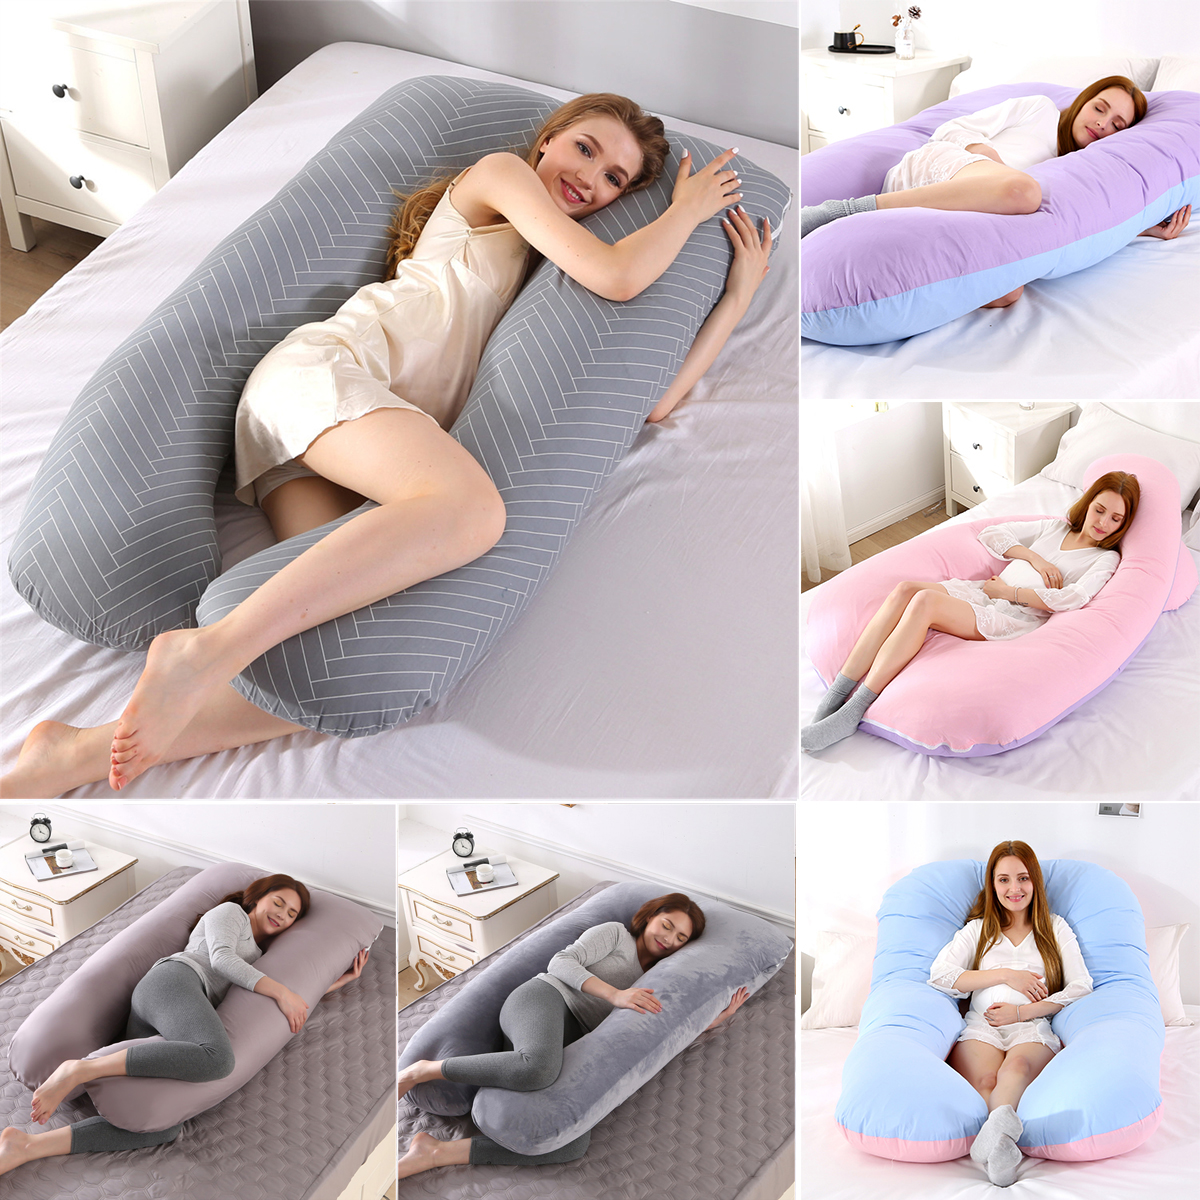 U-Shaped Pregnancy Pillow, Pure Cotton Maternity Pillow, Full Body Pregnant Women Pillow, Extra Comfort Oversize-57x 32 inches, Suitable For Back Sleeper/ Side Sleeper/ Stomach Sleeper - image 1 of 6